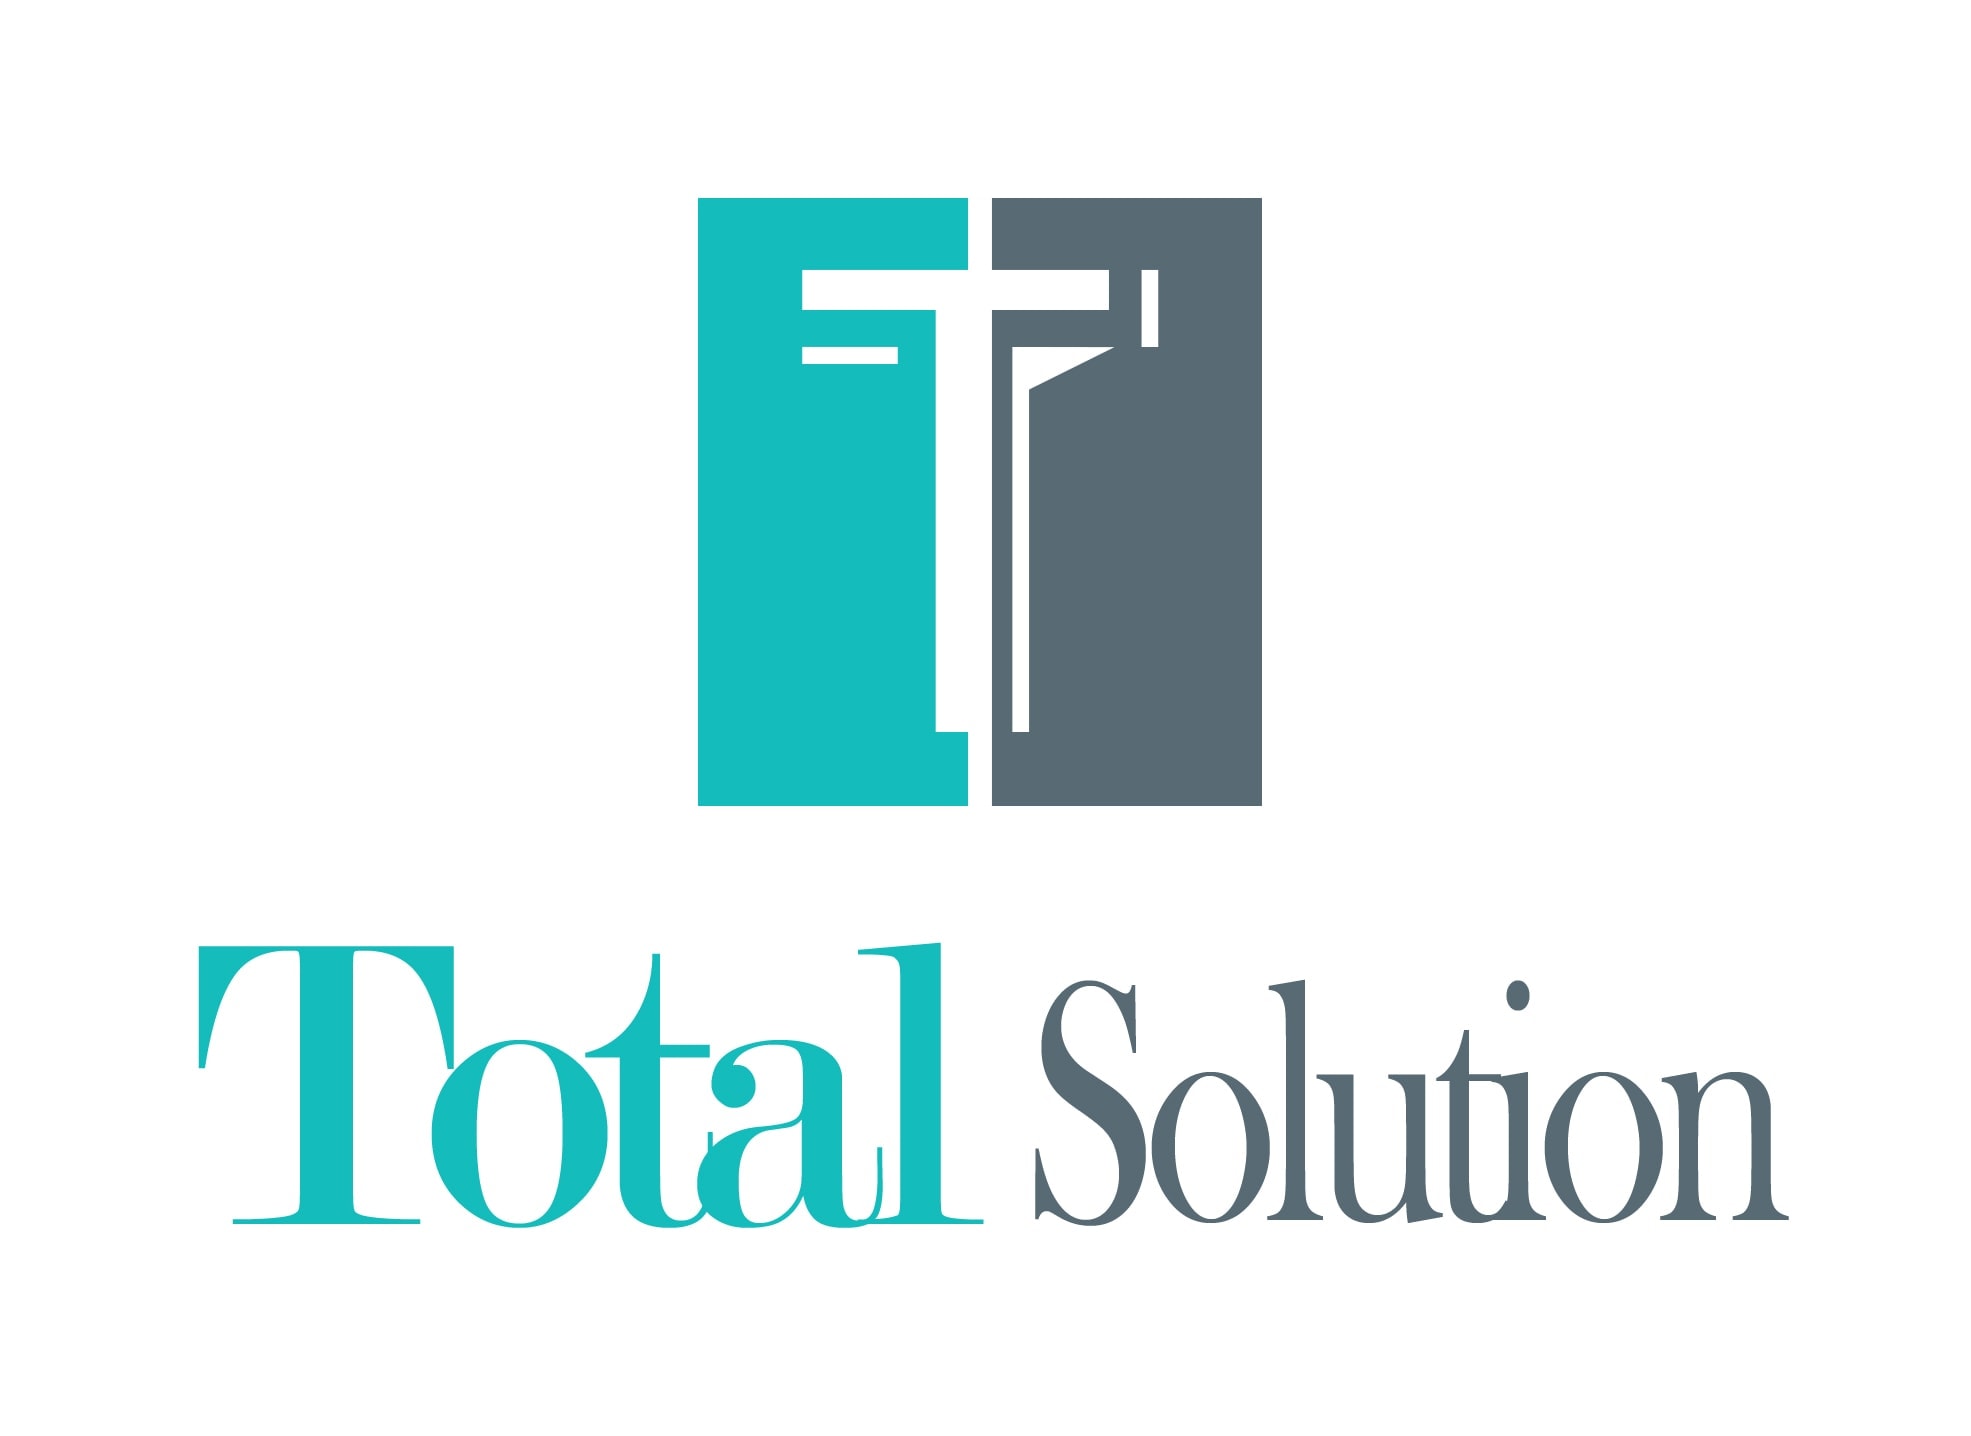 M/S TOTAL SOLUTION